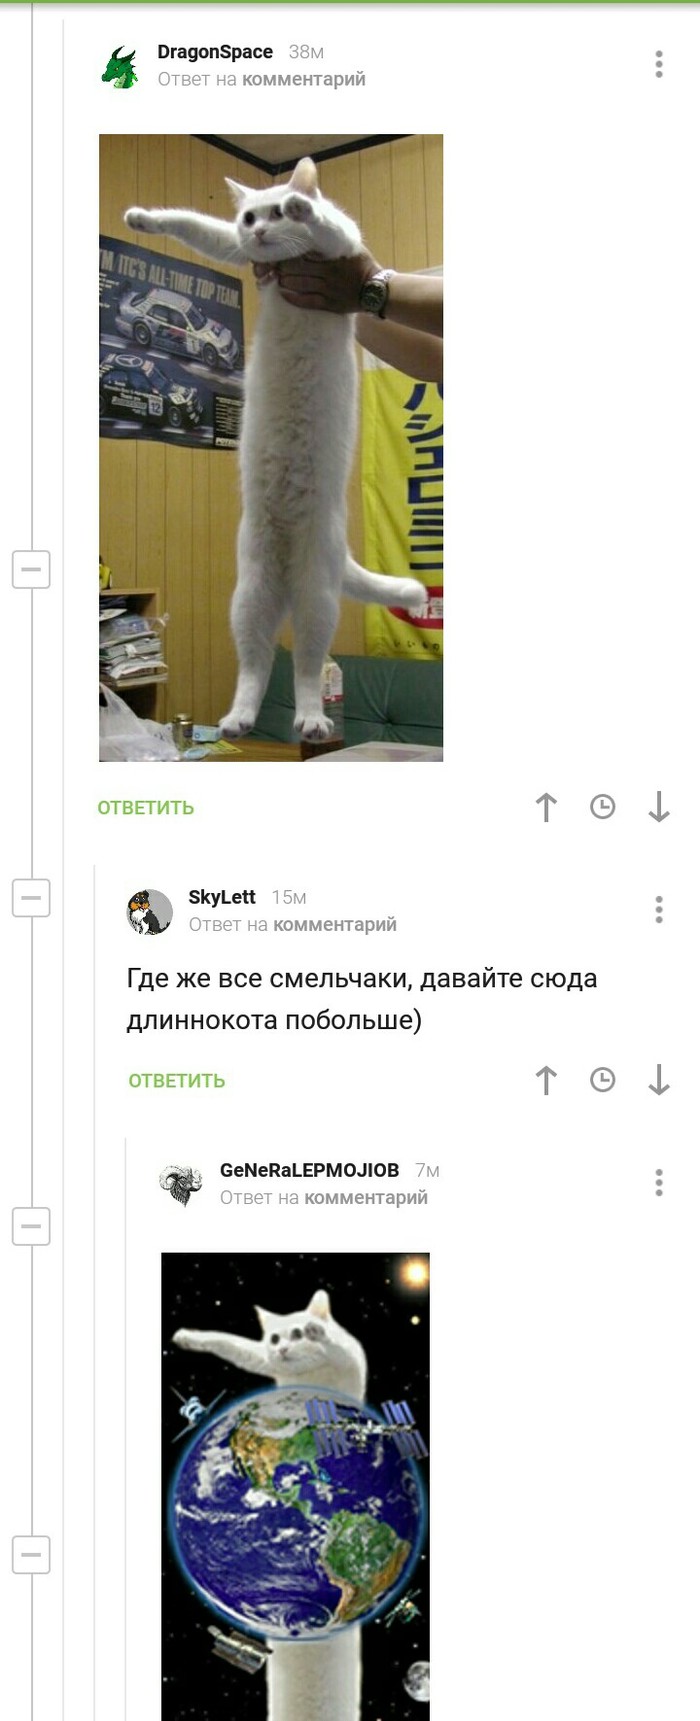 The comments are happy again - Longpost, cat, Screenshot, Comments, Comments on Peekaboo, Longcat